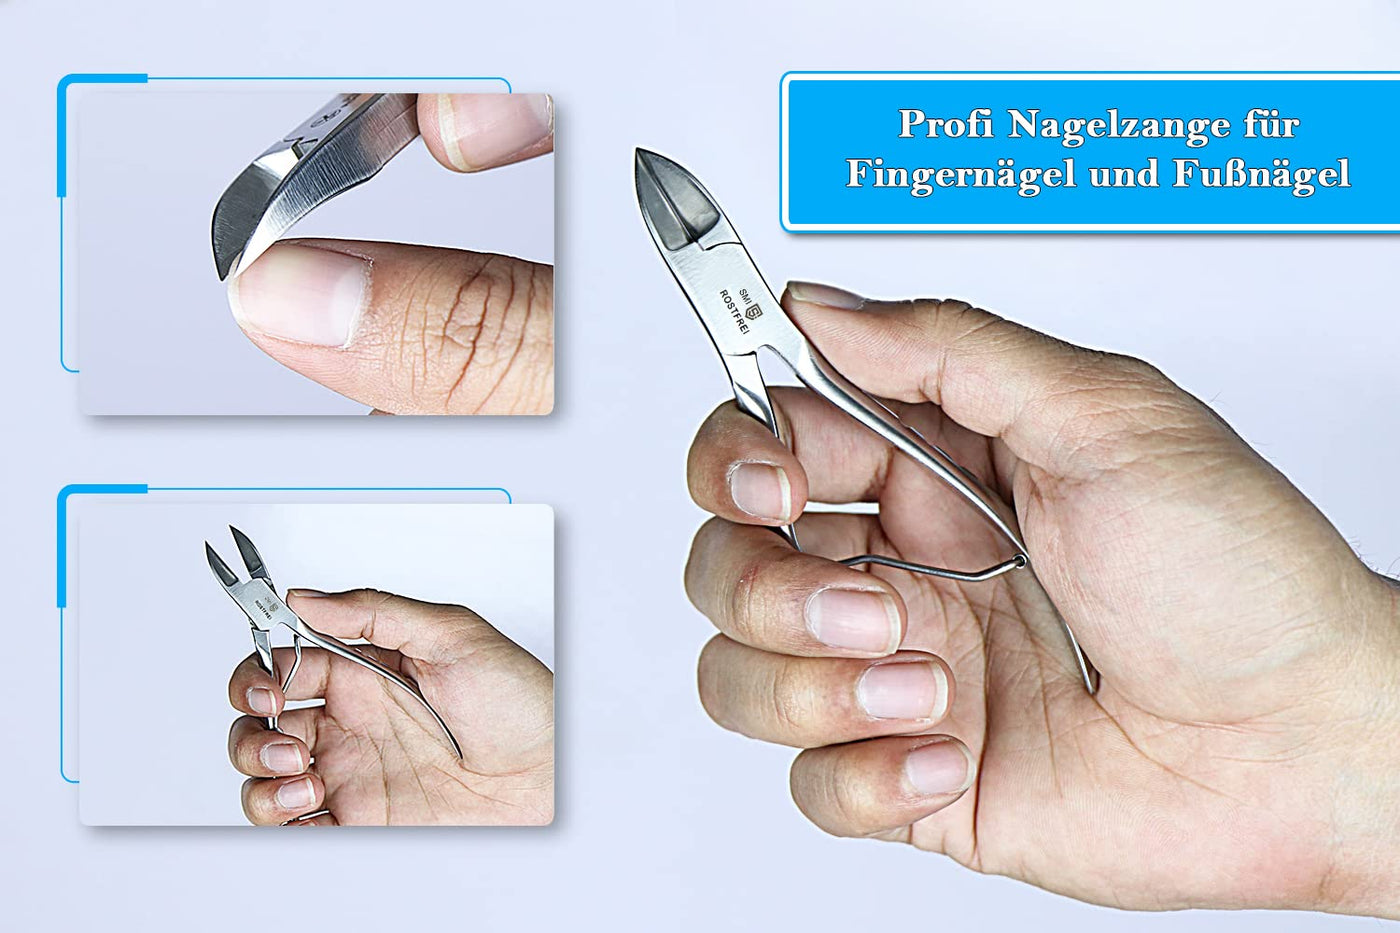 SMI - 11.9 cm Ingrown Toenail Clippers for Thick Nails Heavy Duty